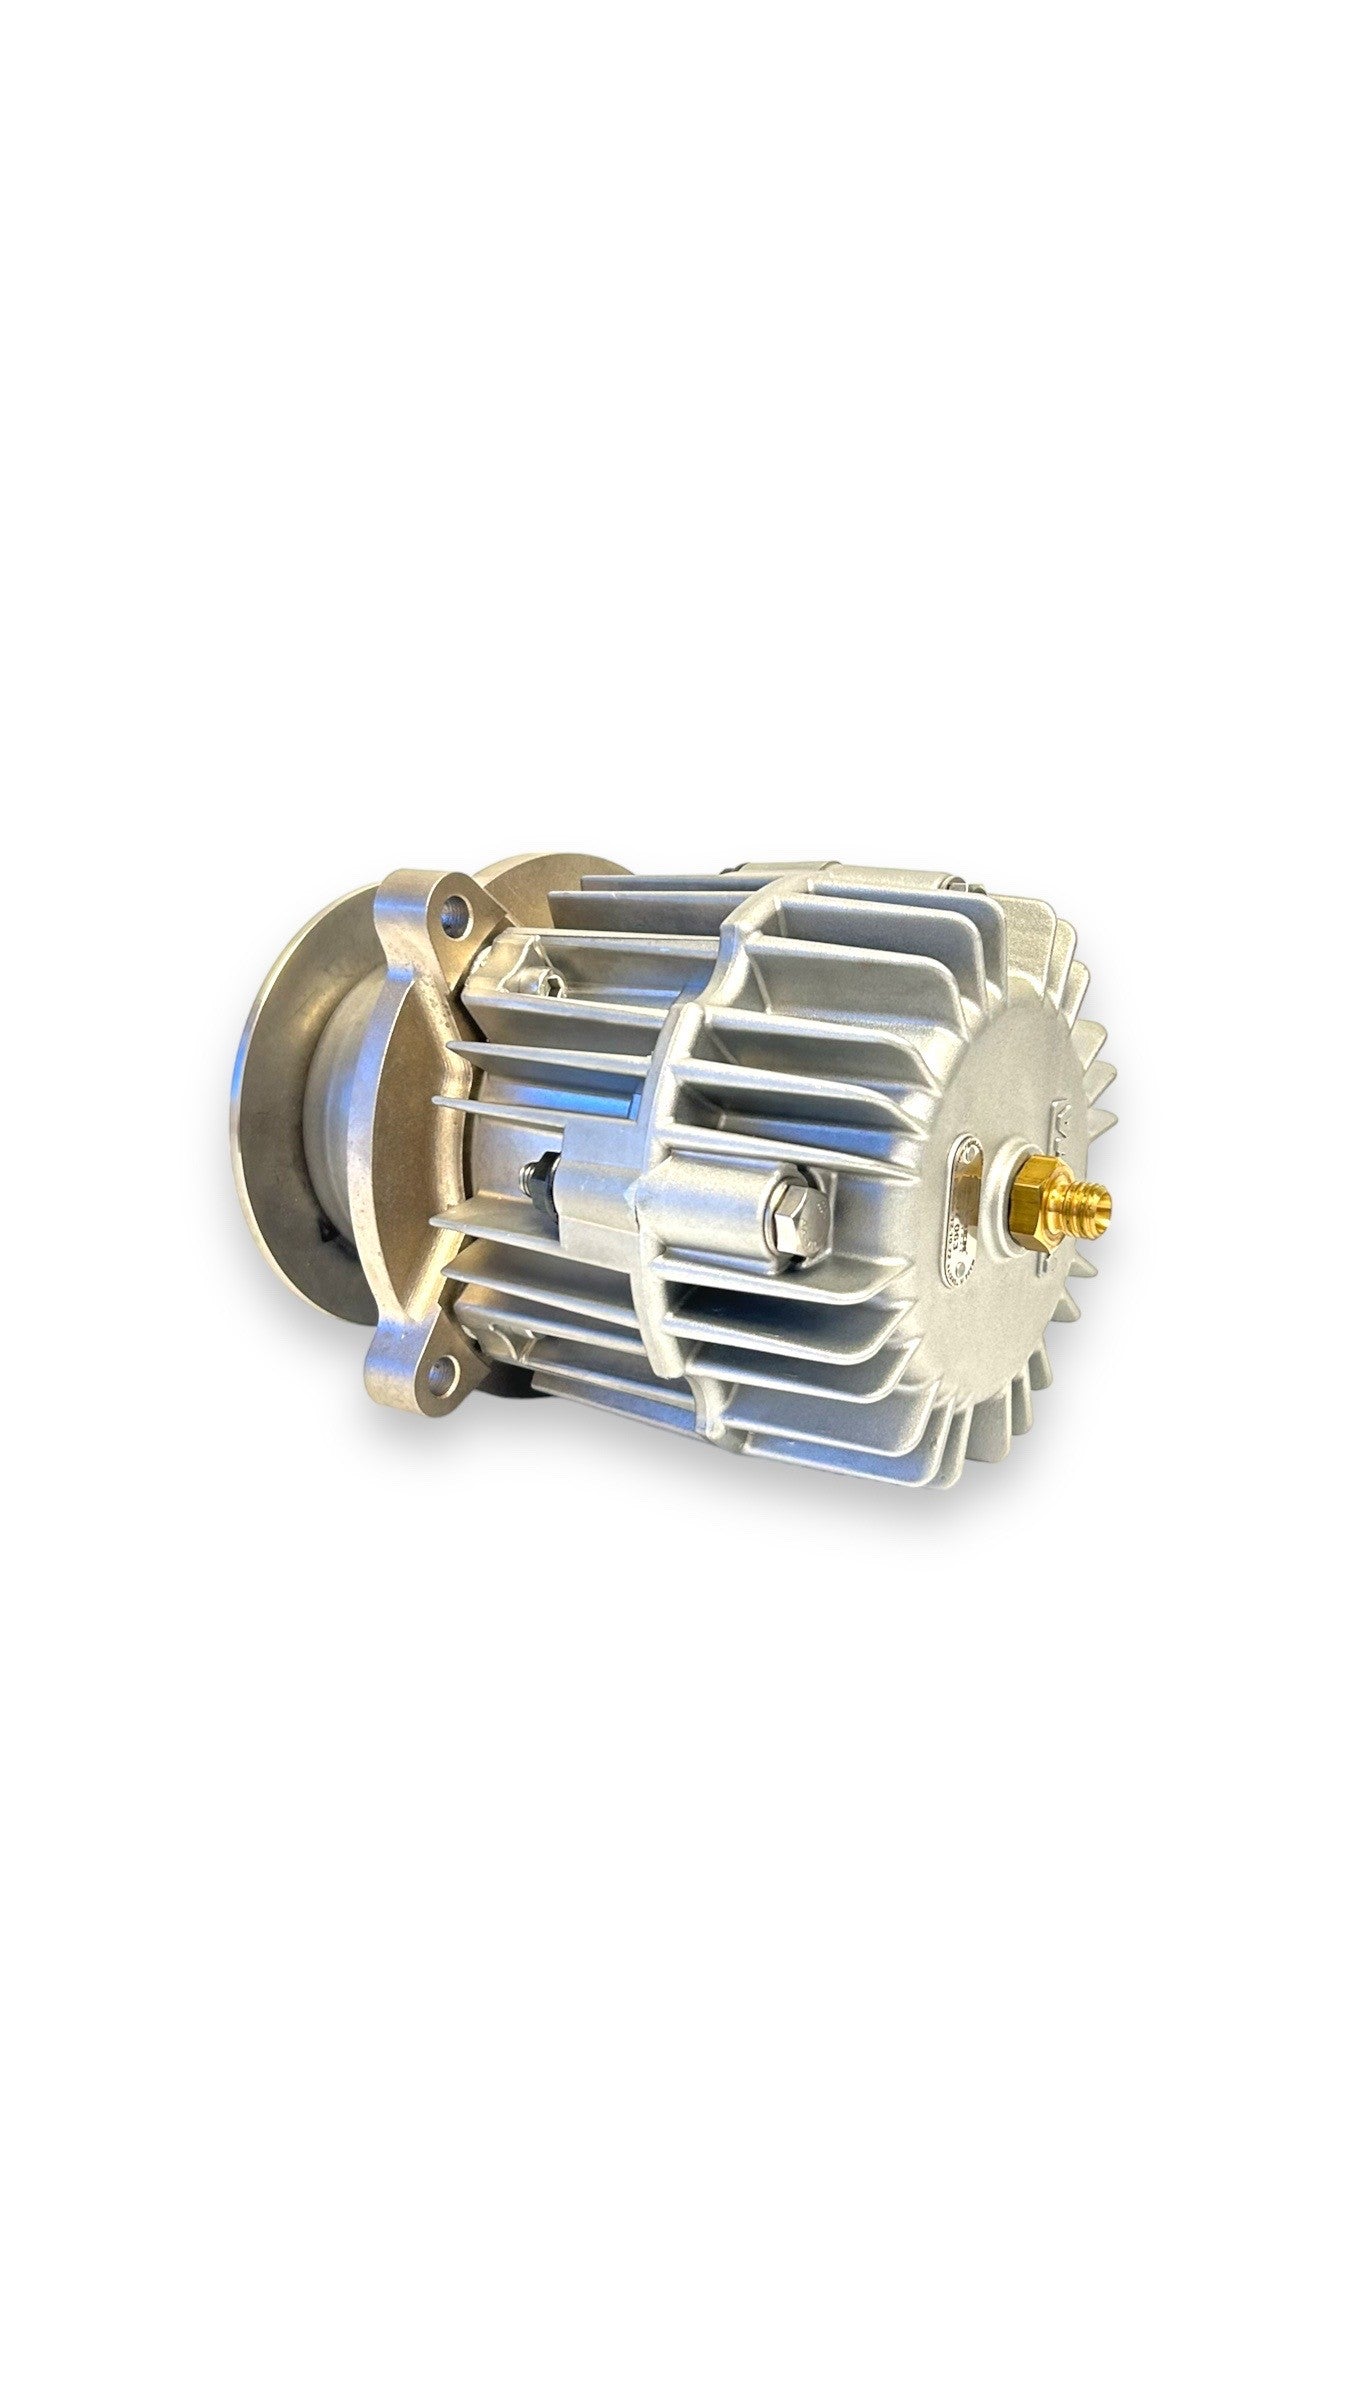 Exhaust Pressure Governor for Volvo Truck Engines